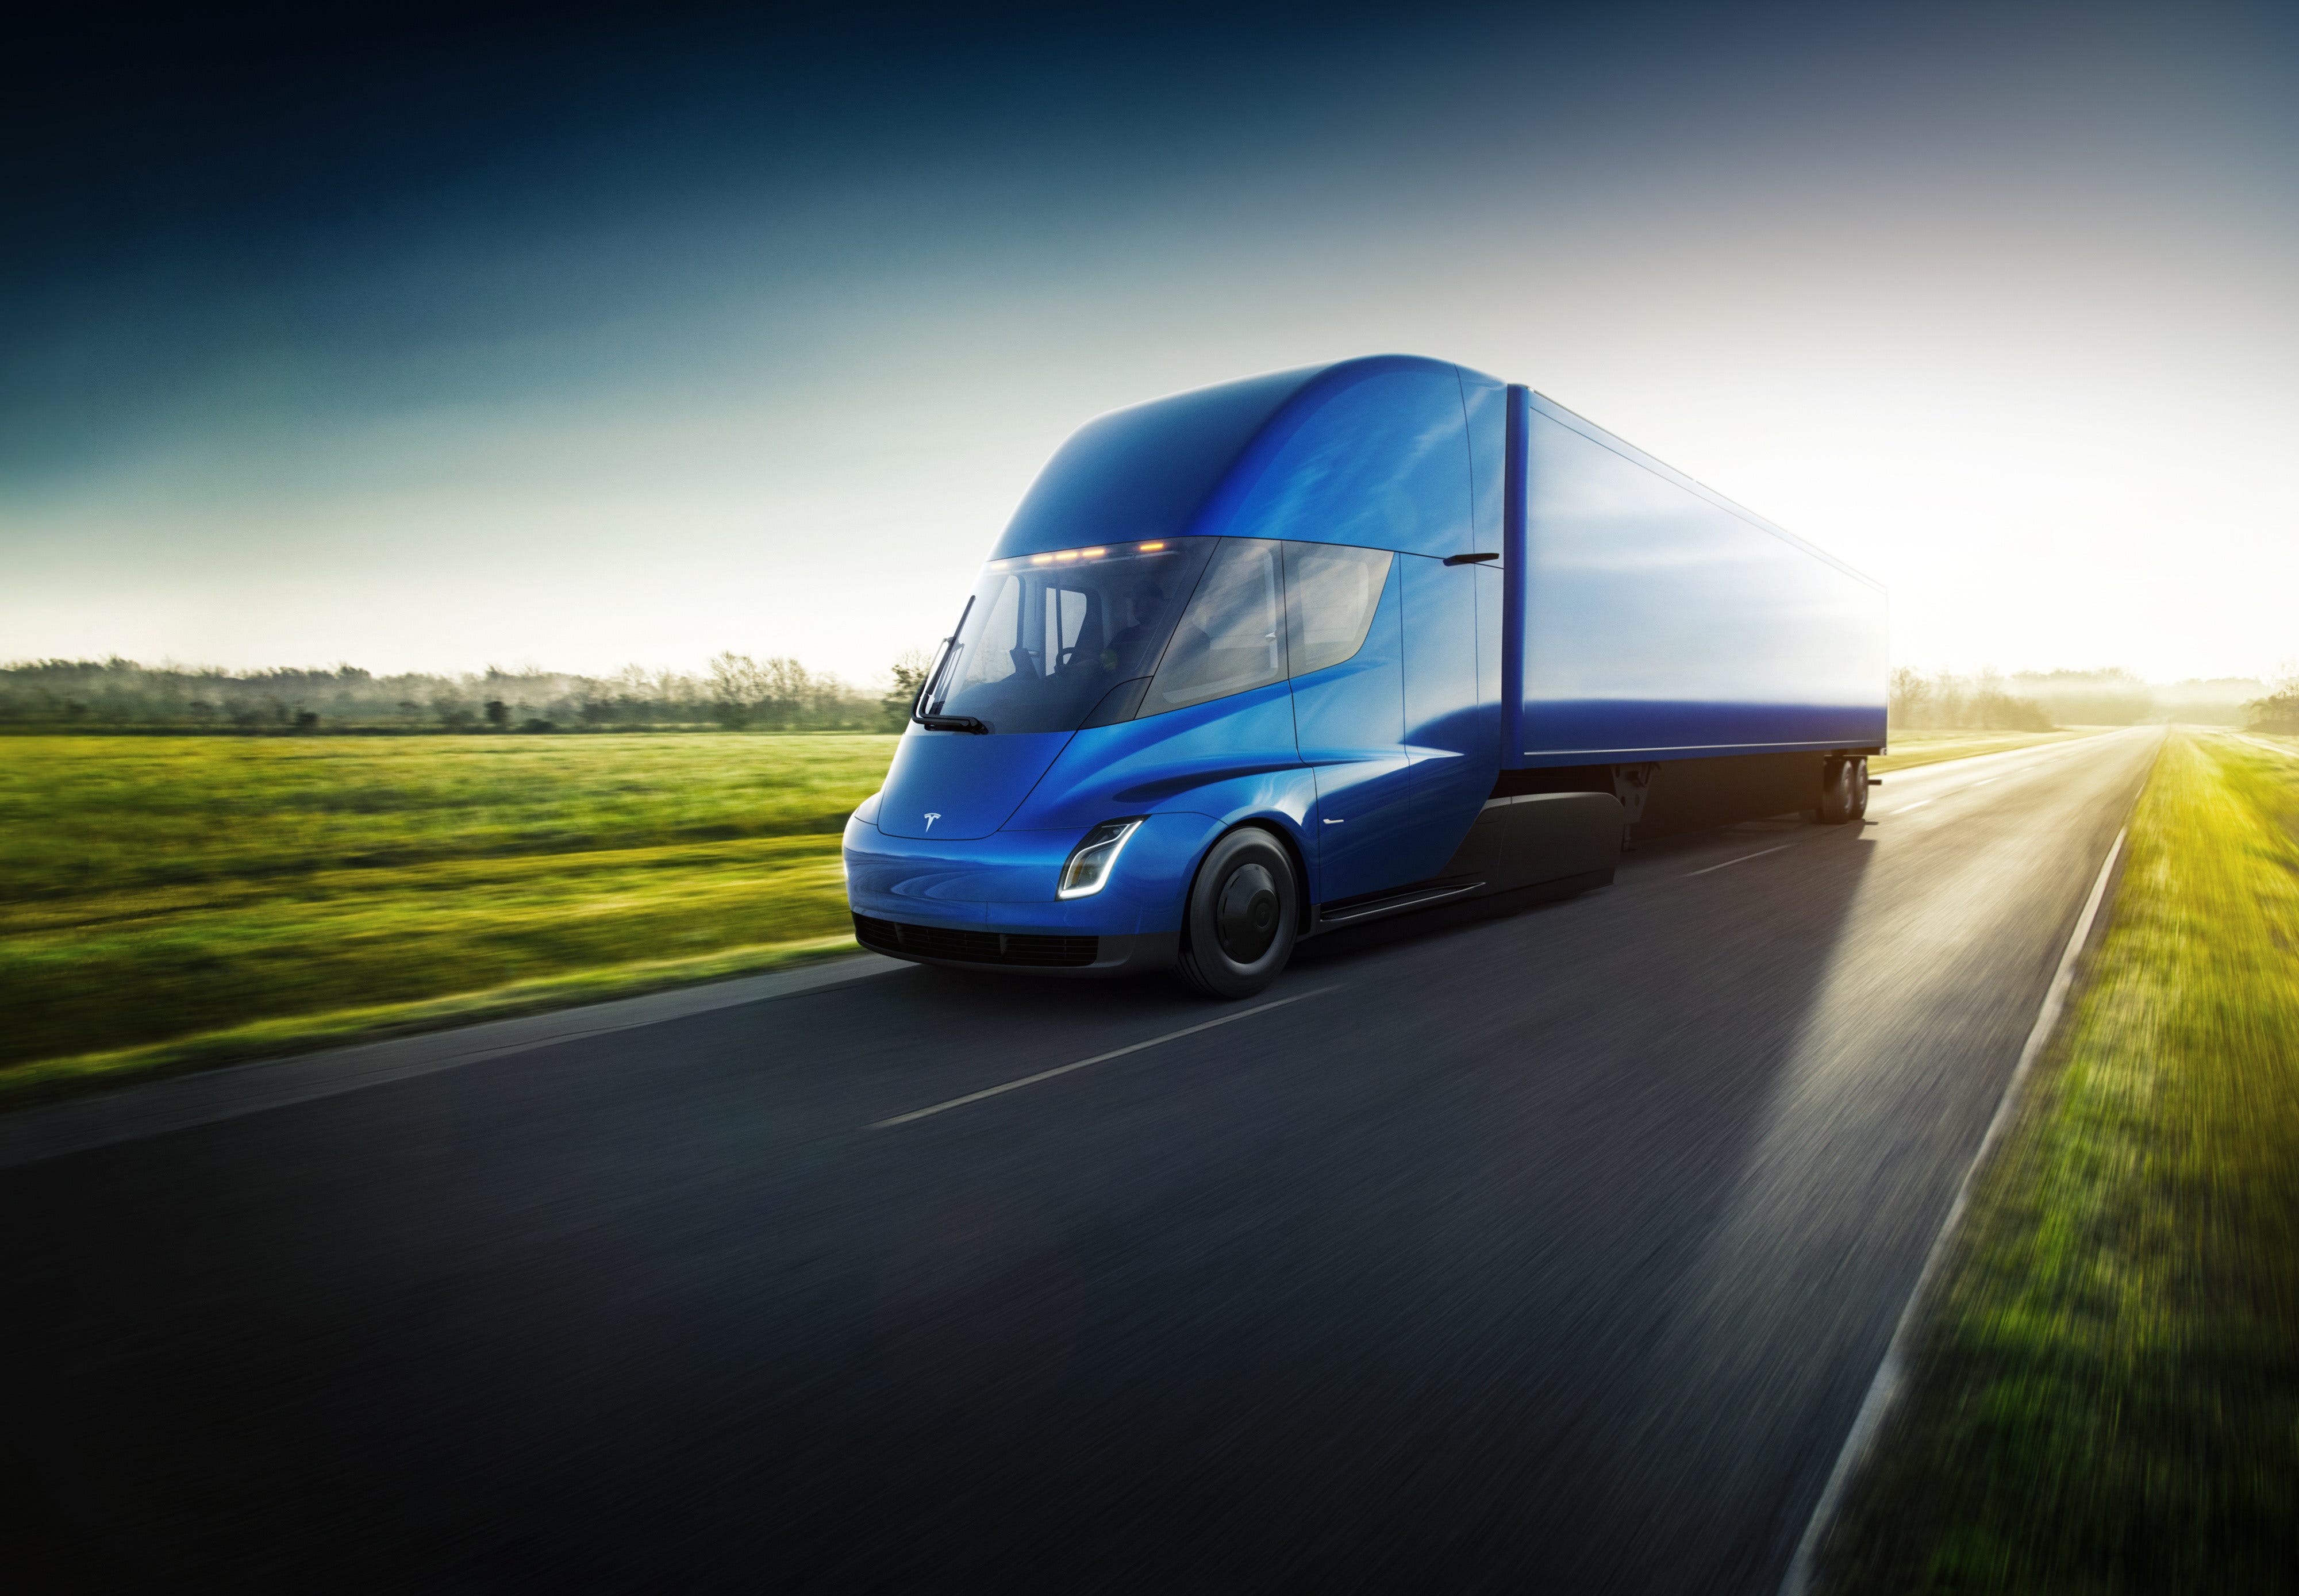 Tesla Gets Order For 10 Semi Trucks, 2 Megachargers From US Government-Backed Buyer